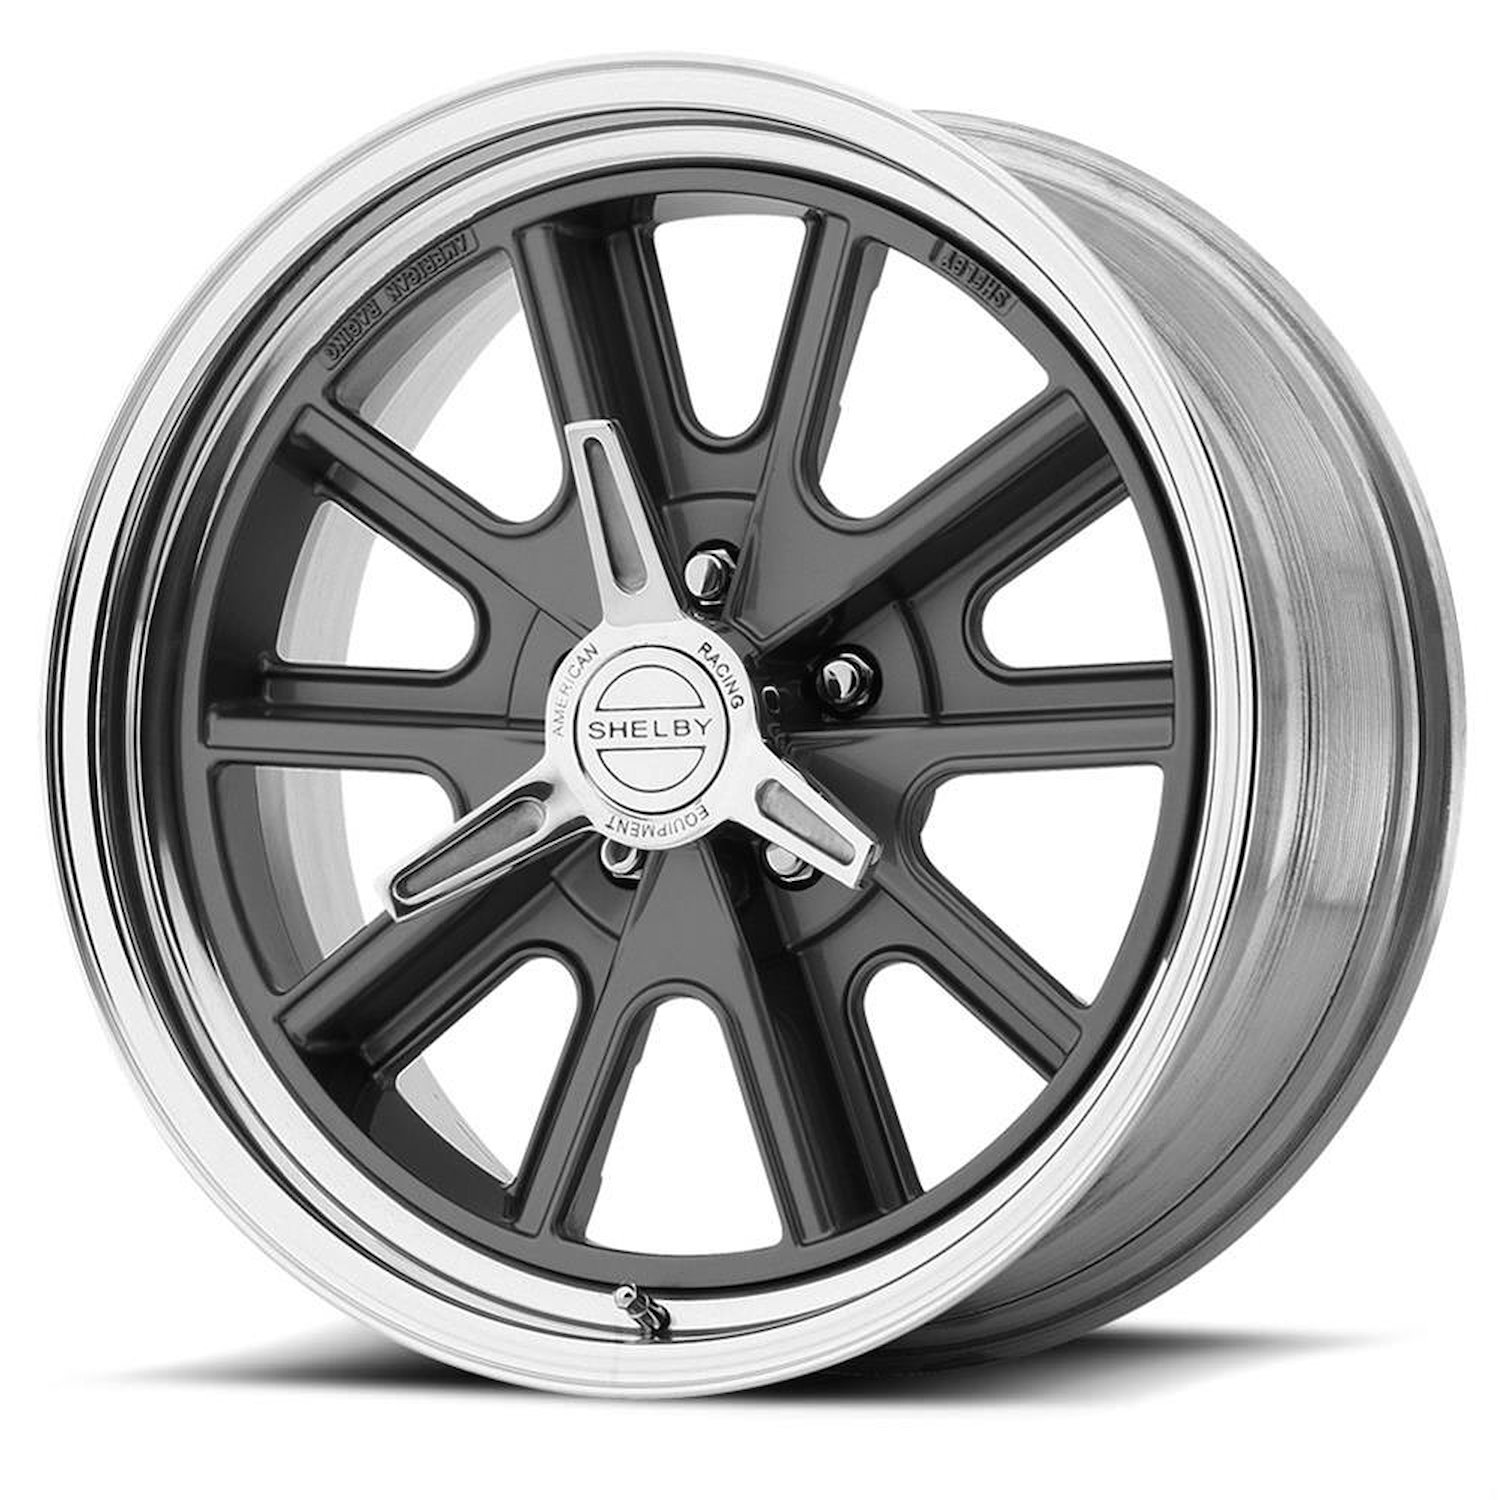 AMERICAN RACING 427 SHELBY COBRA TWO-PIECE MAG GRAY CENTER POLISHED BARREL 17 x 8 5x4.5 -25 3.52